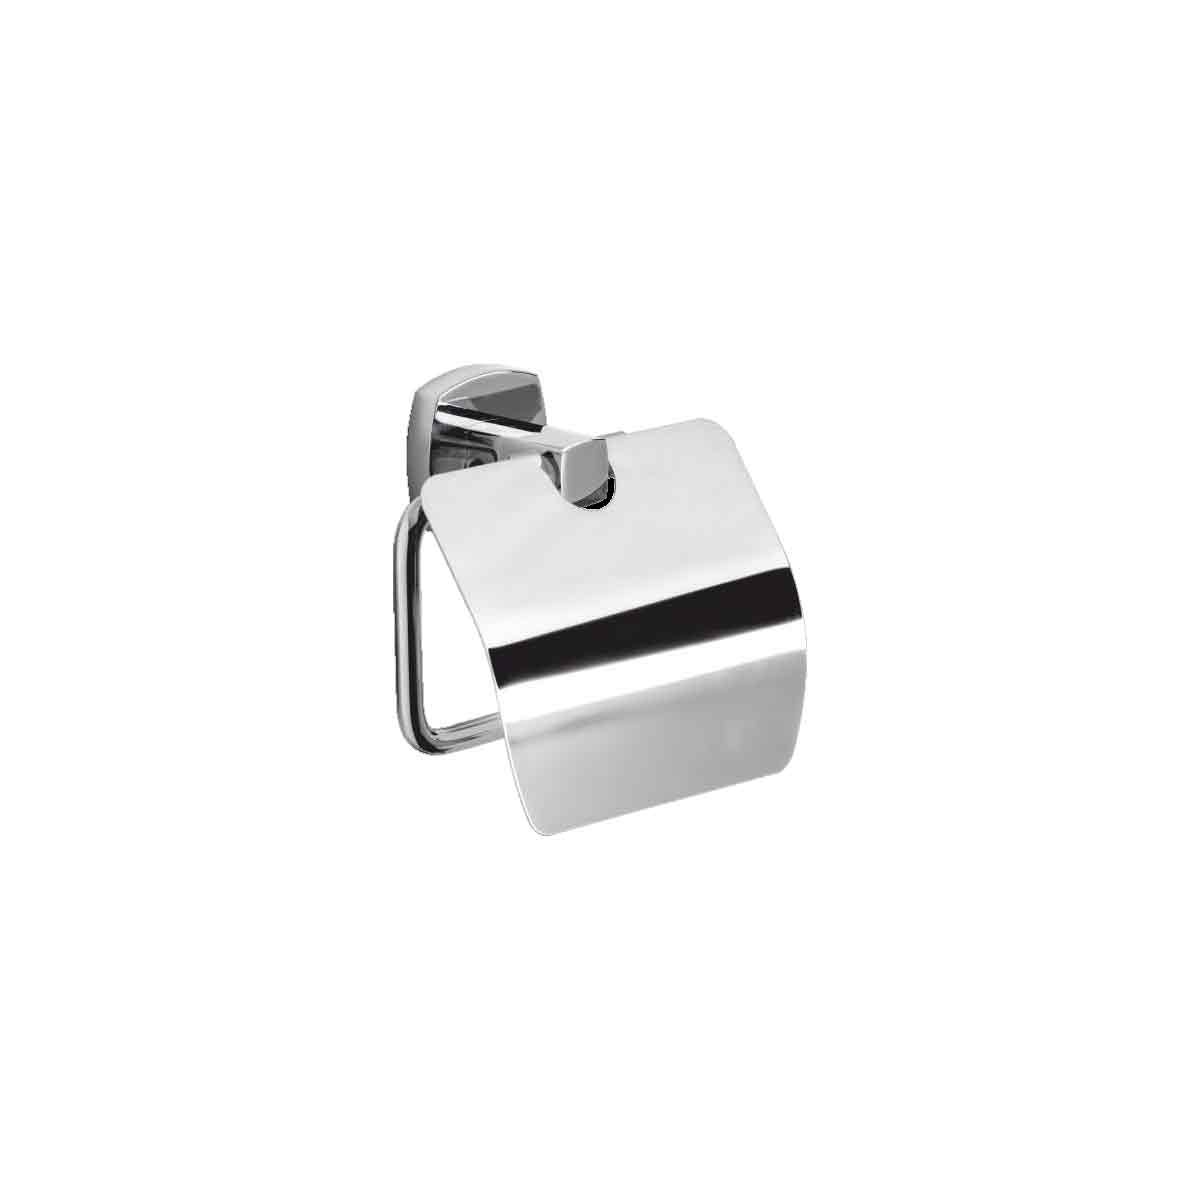 Closed toilet roll holder Q-line